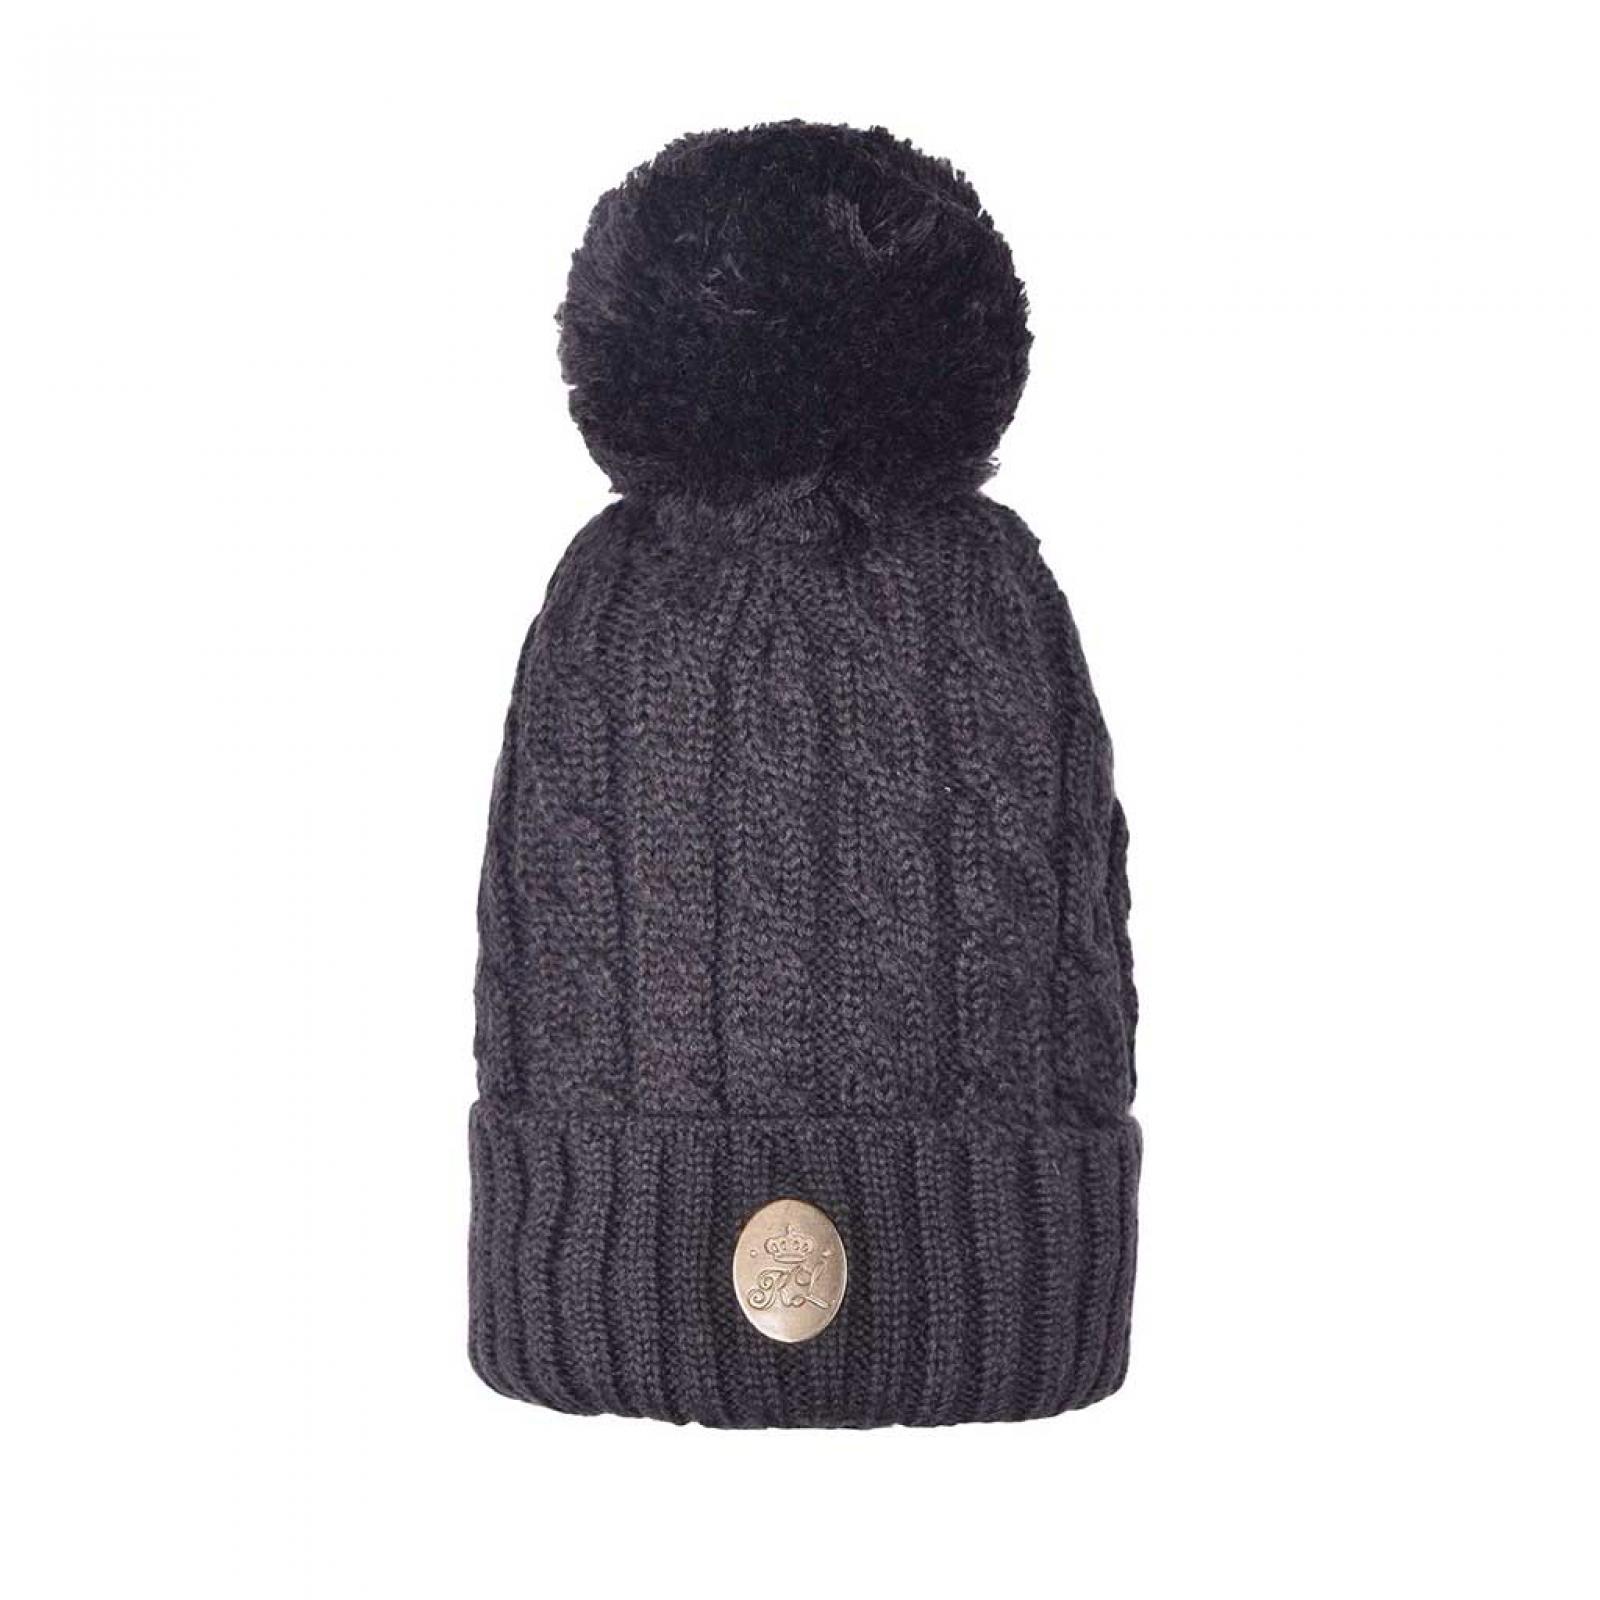 Kingsland Dot Cable Knit Brown Licorice Hat